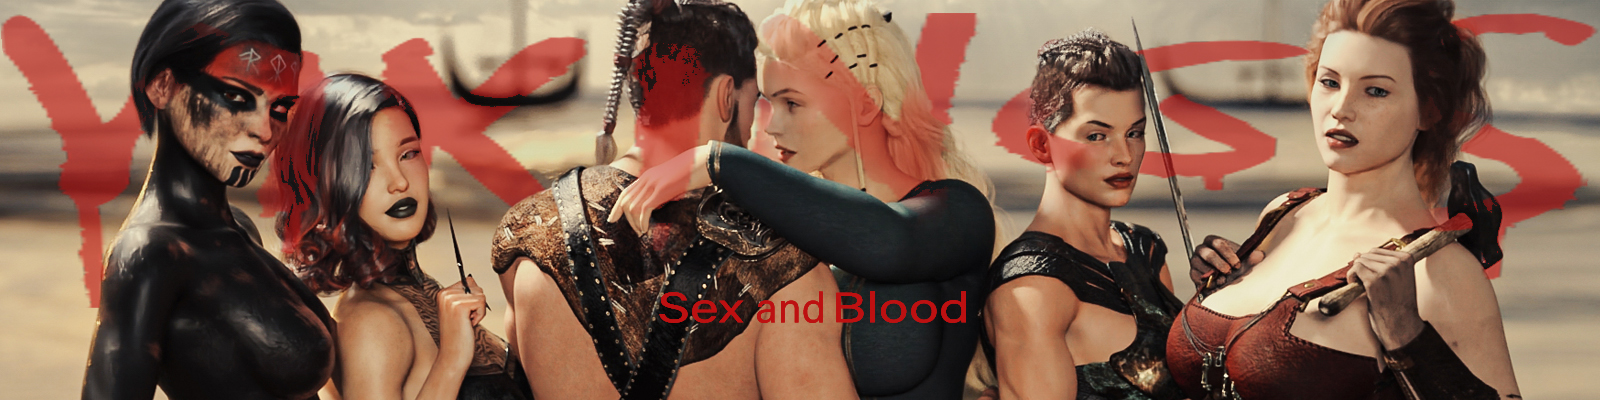 Vikings: Sex and Blood poster